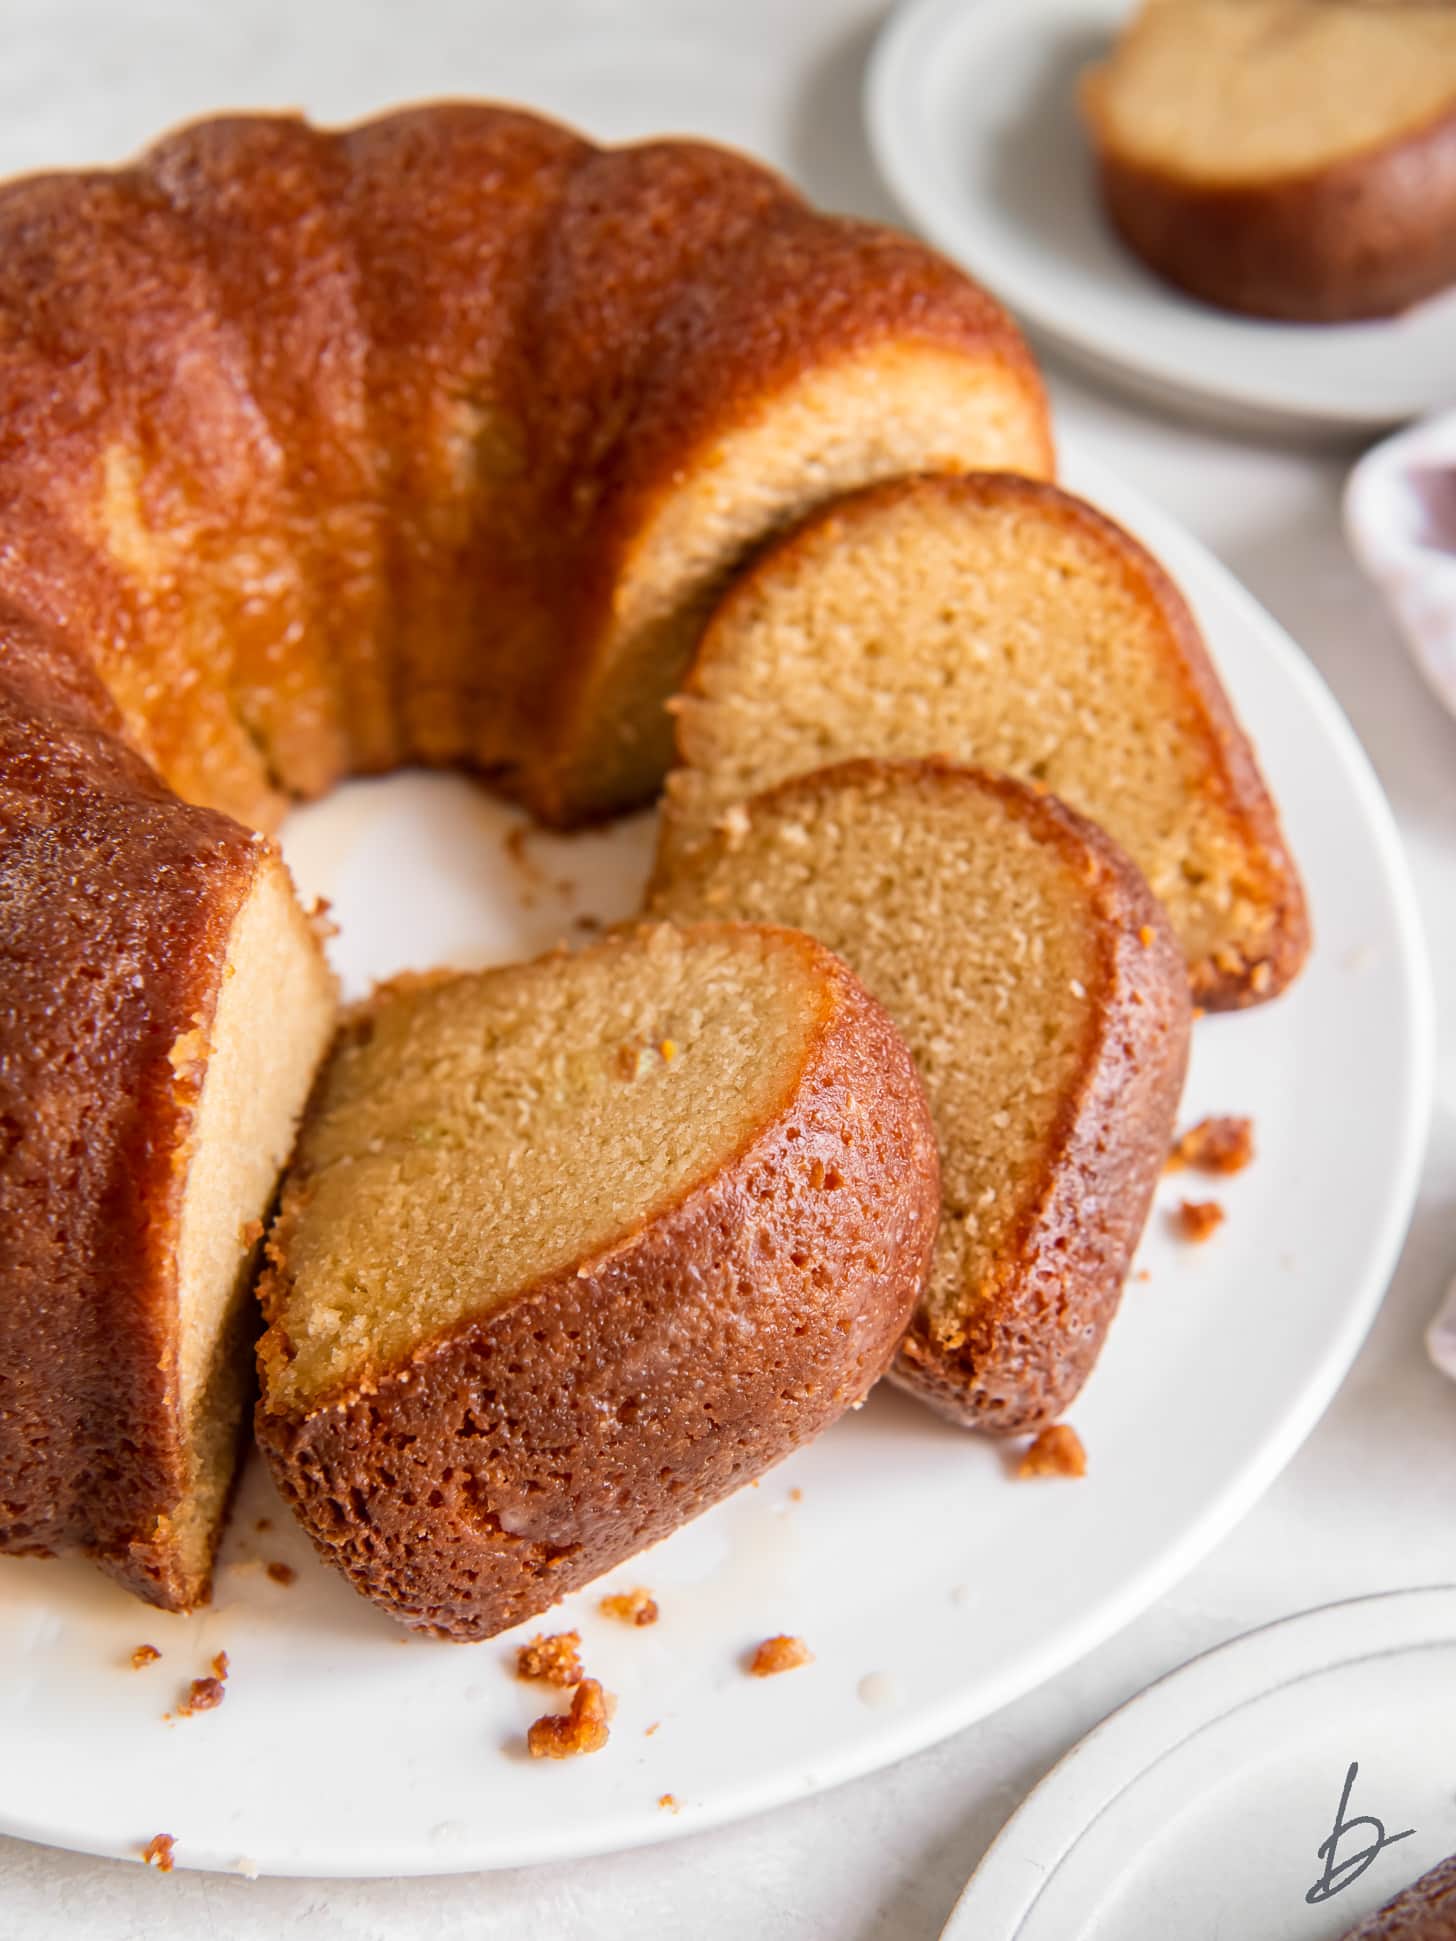 slices of homemade rum cake leaning on each other and bundt cake.